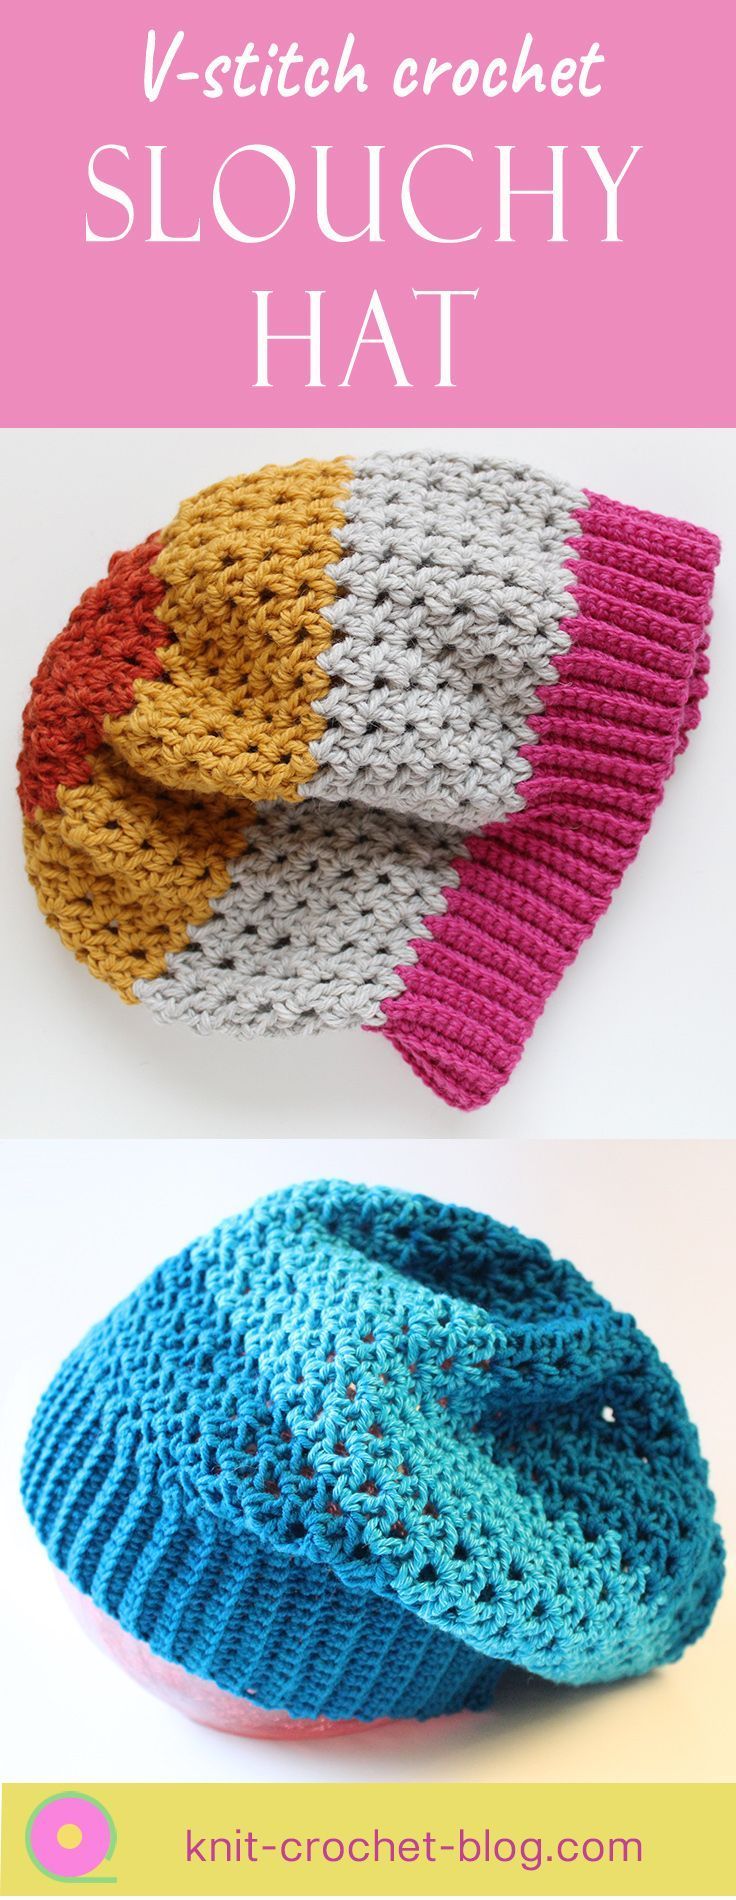 Crochet a slouchy hat in V-stitch - Knit & Crochet Blog -   17 knitting and crochet Projects colour ideas